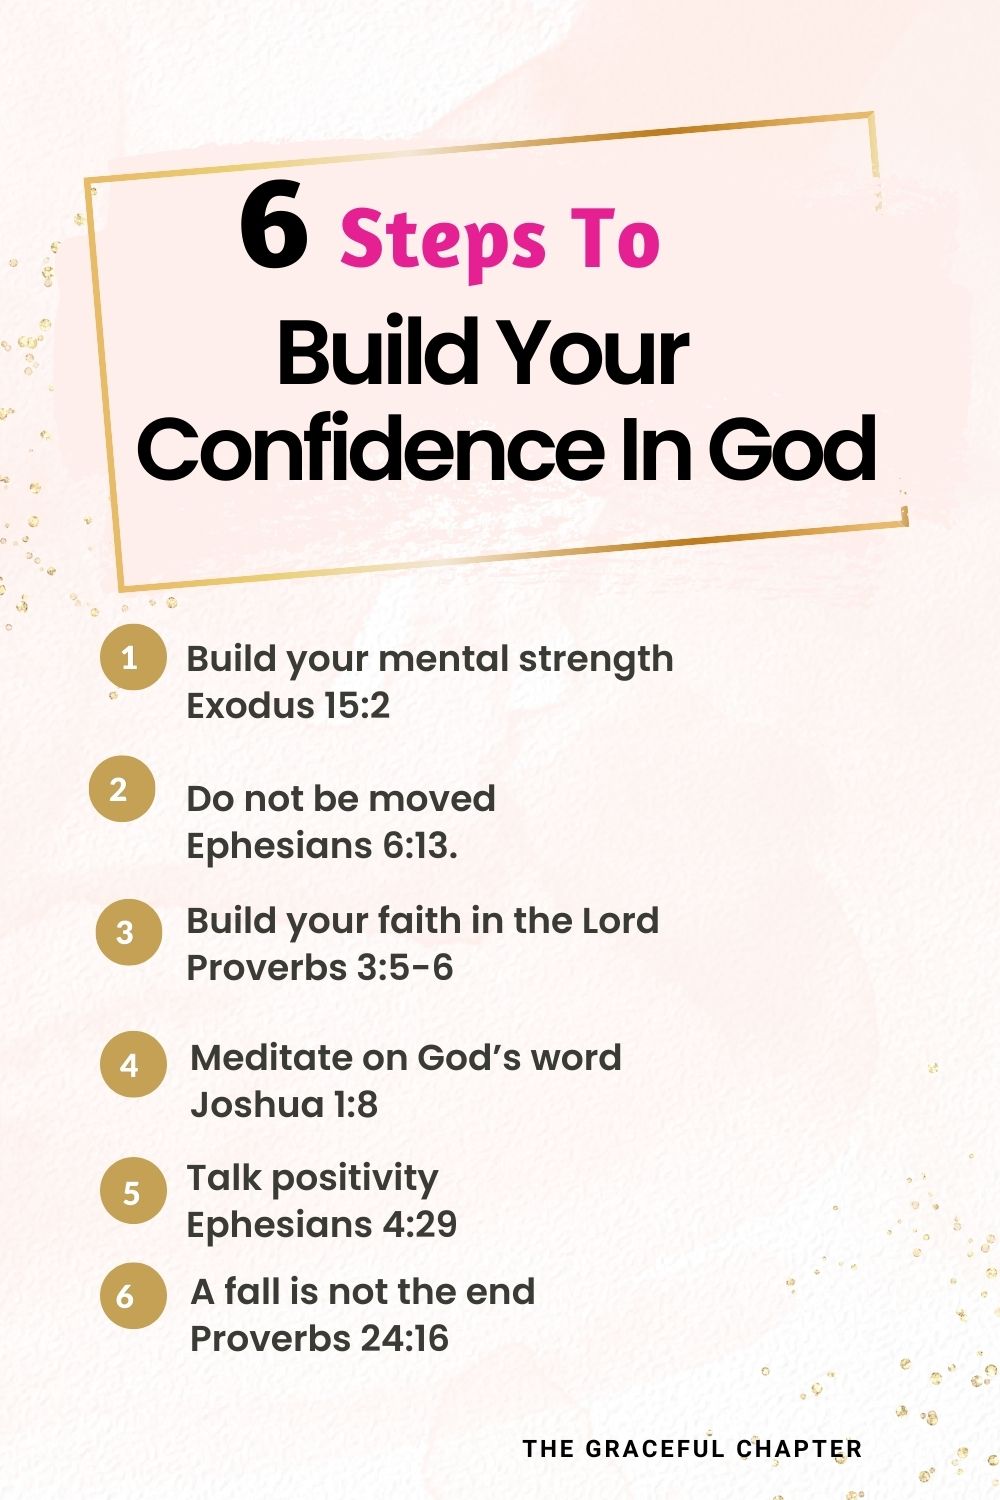 6 steps to build your confidence in God